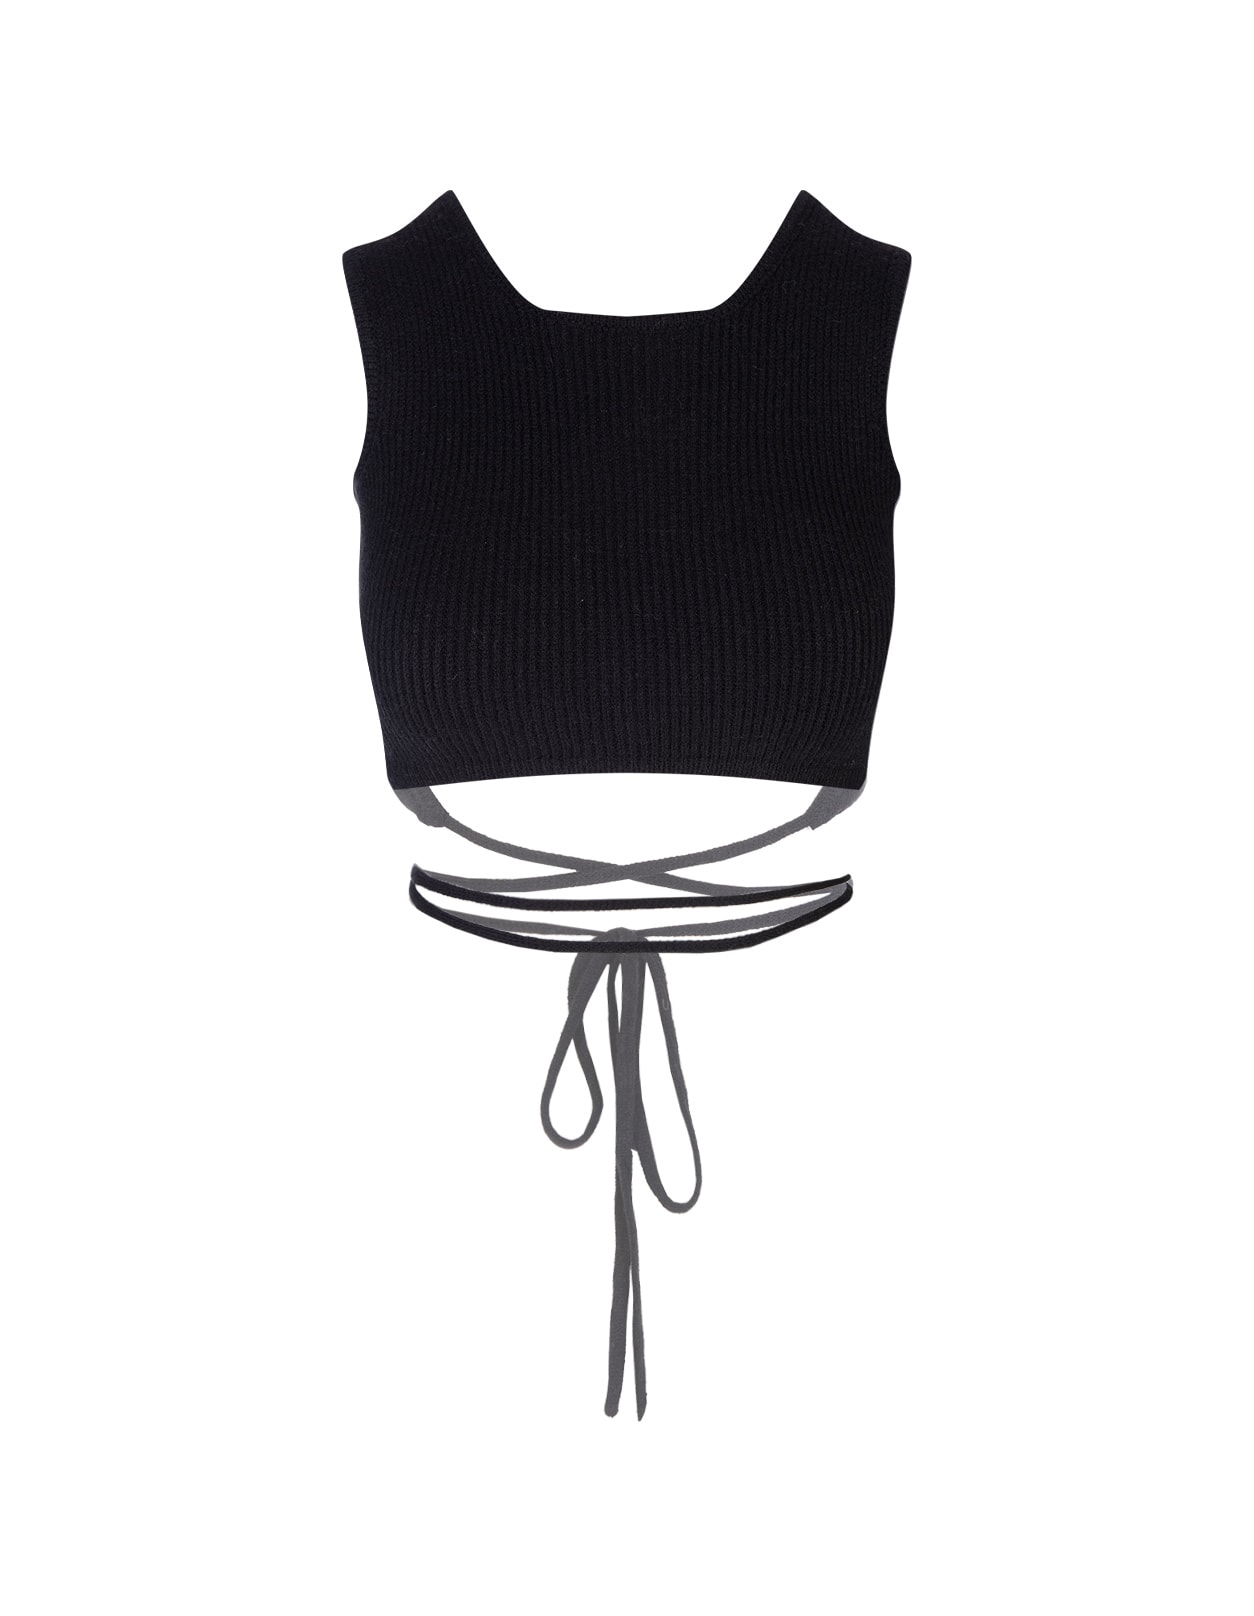 A PAPER KID BLACK KNITTED CROP TOP WITH CROSS